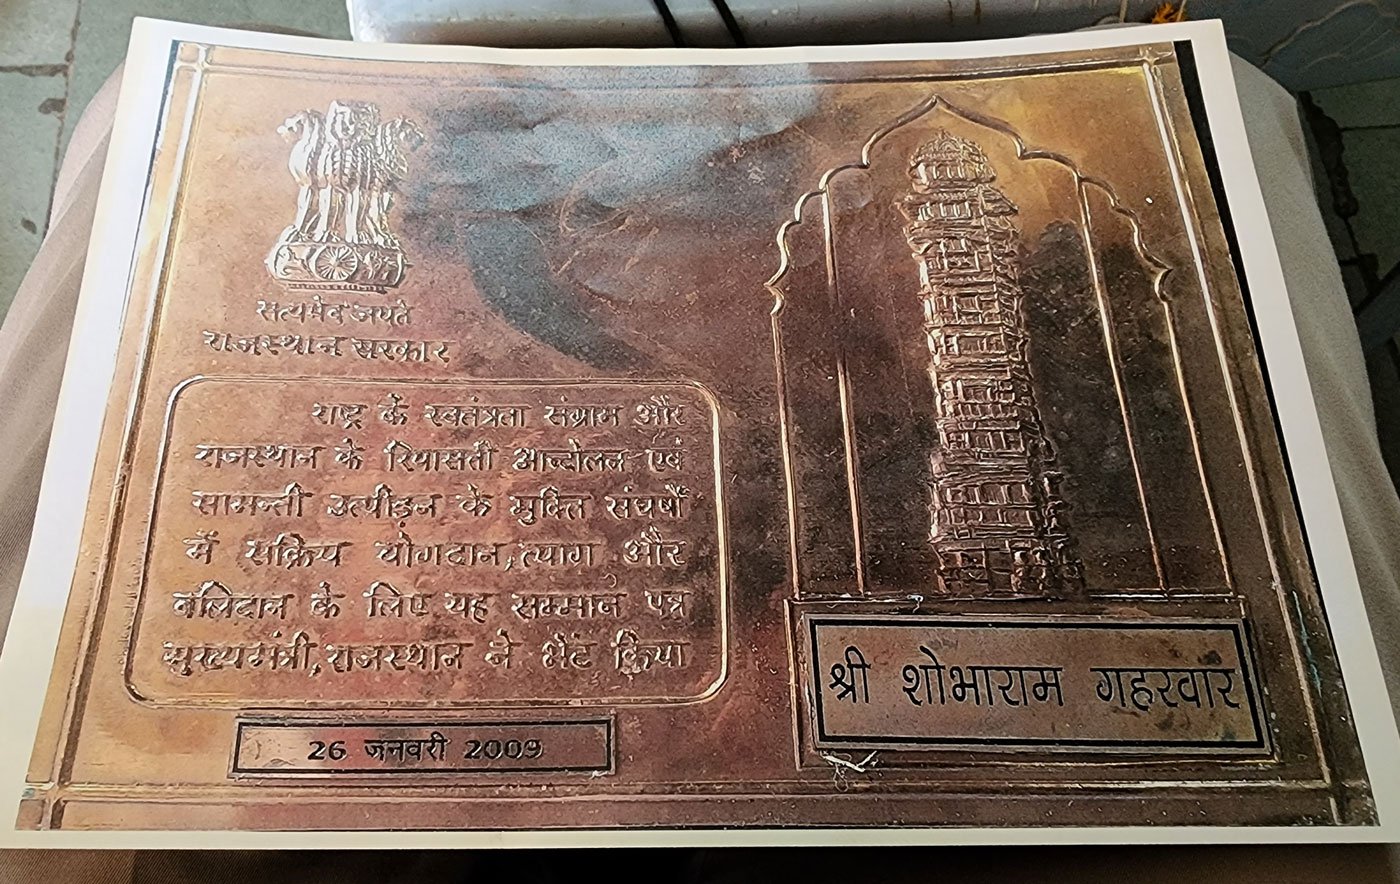 The award presented to Shobharam Gehervar by the Chief Minister of Rajasthan on January 26, 2009, for his contribution to the freedom struggle